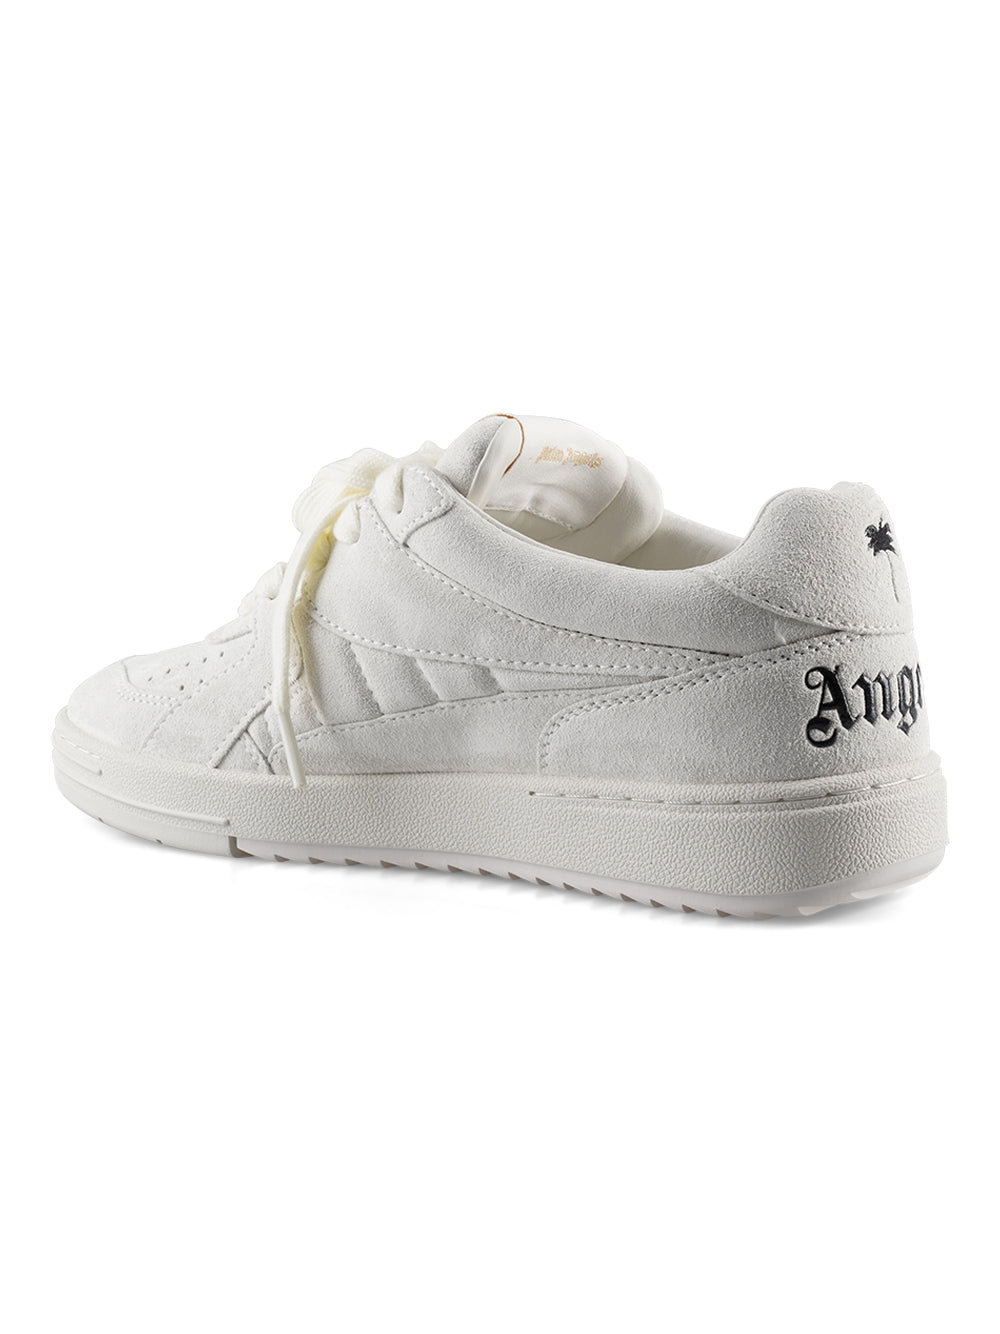 PALM ANGELS WHITE SNEAKER